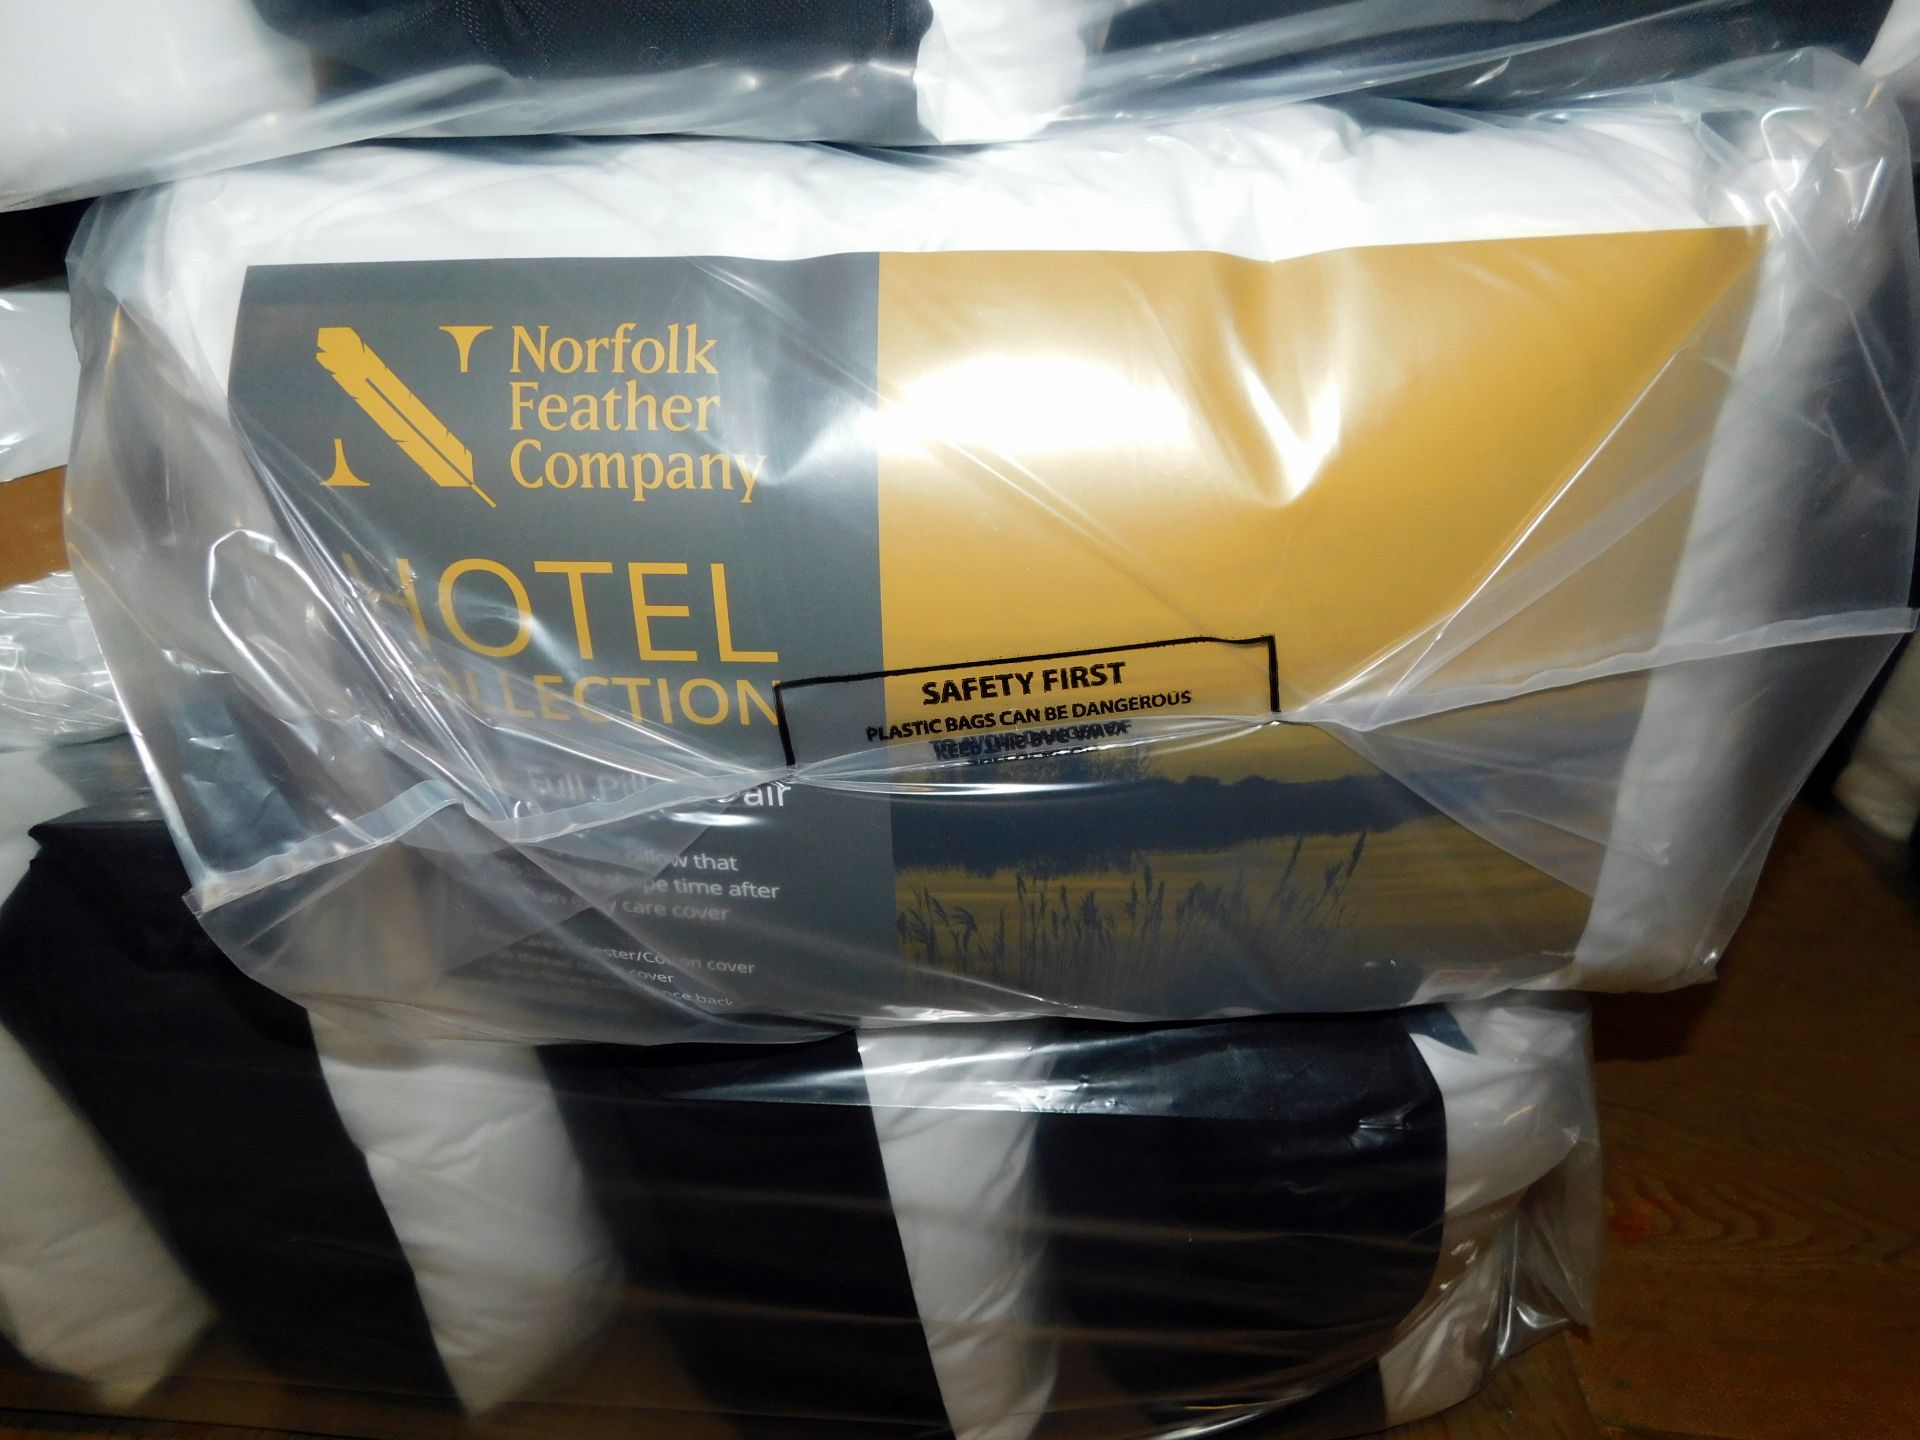 50 Bags of Hotel Collection Pillows. Pair per Bag (Location Diss. Please Refer to General Notes)